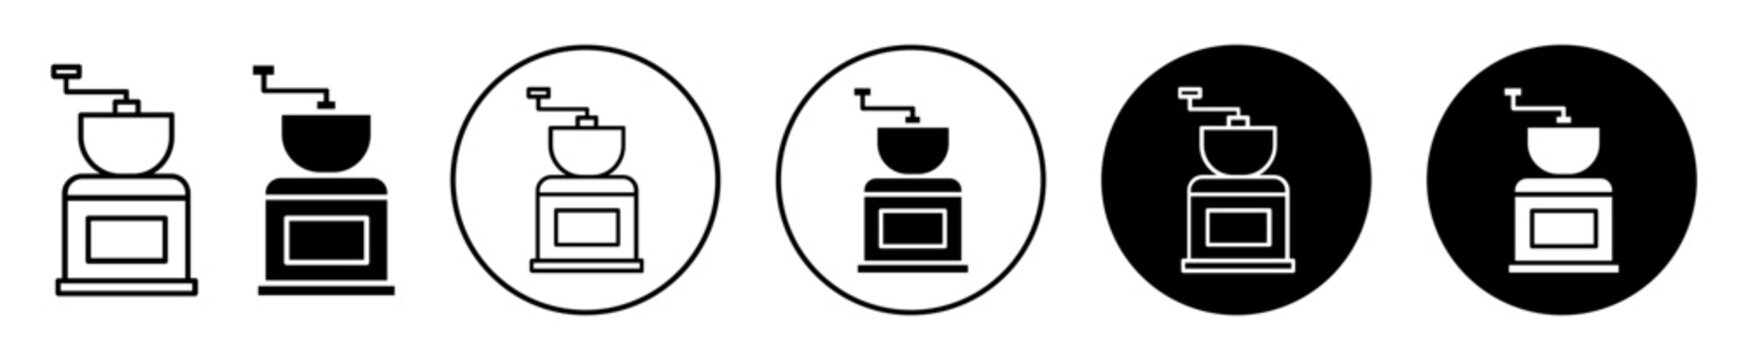 coffee grinder icon set. coffee beans roaster vector symbol in black filled and outlined style.